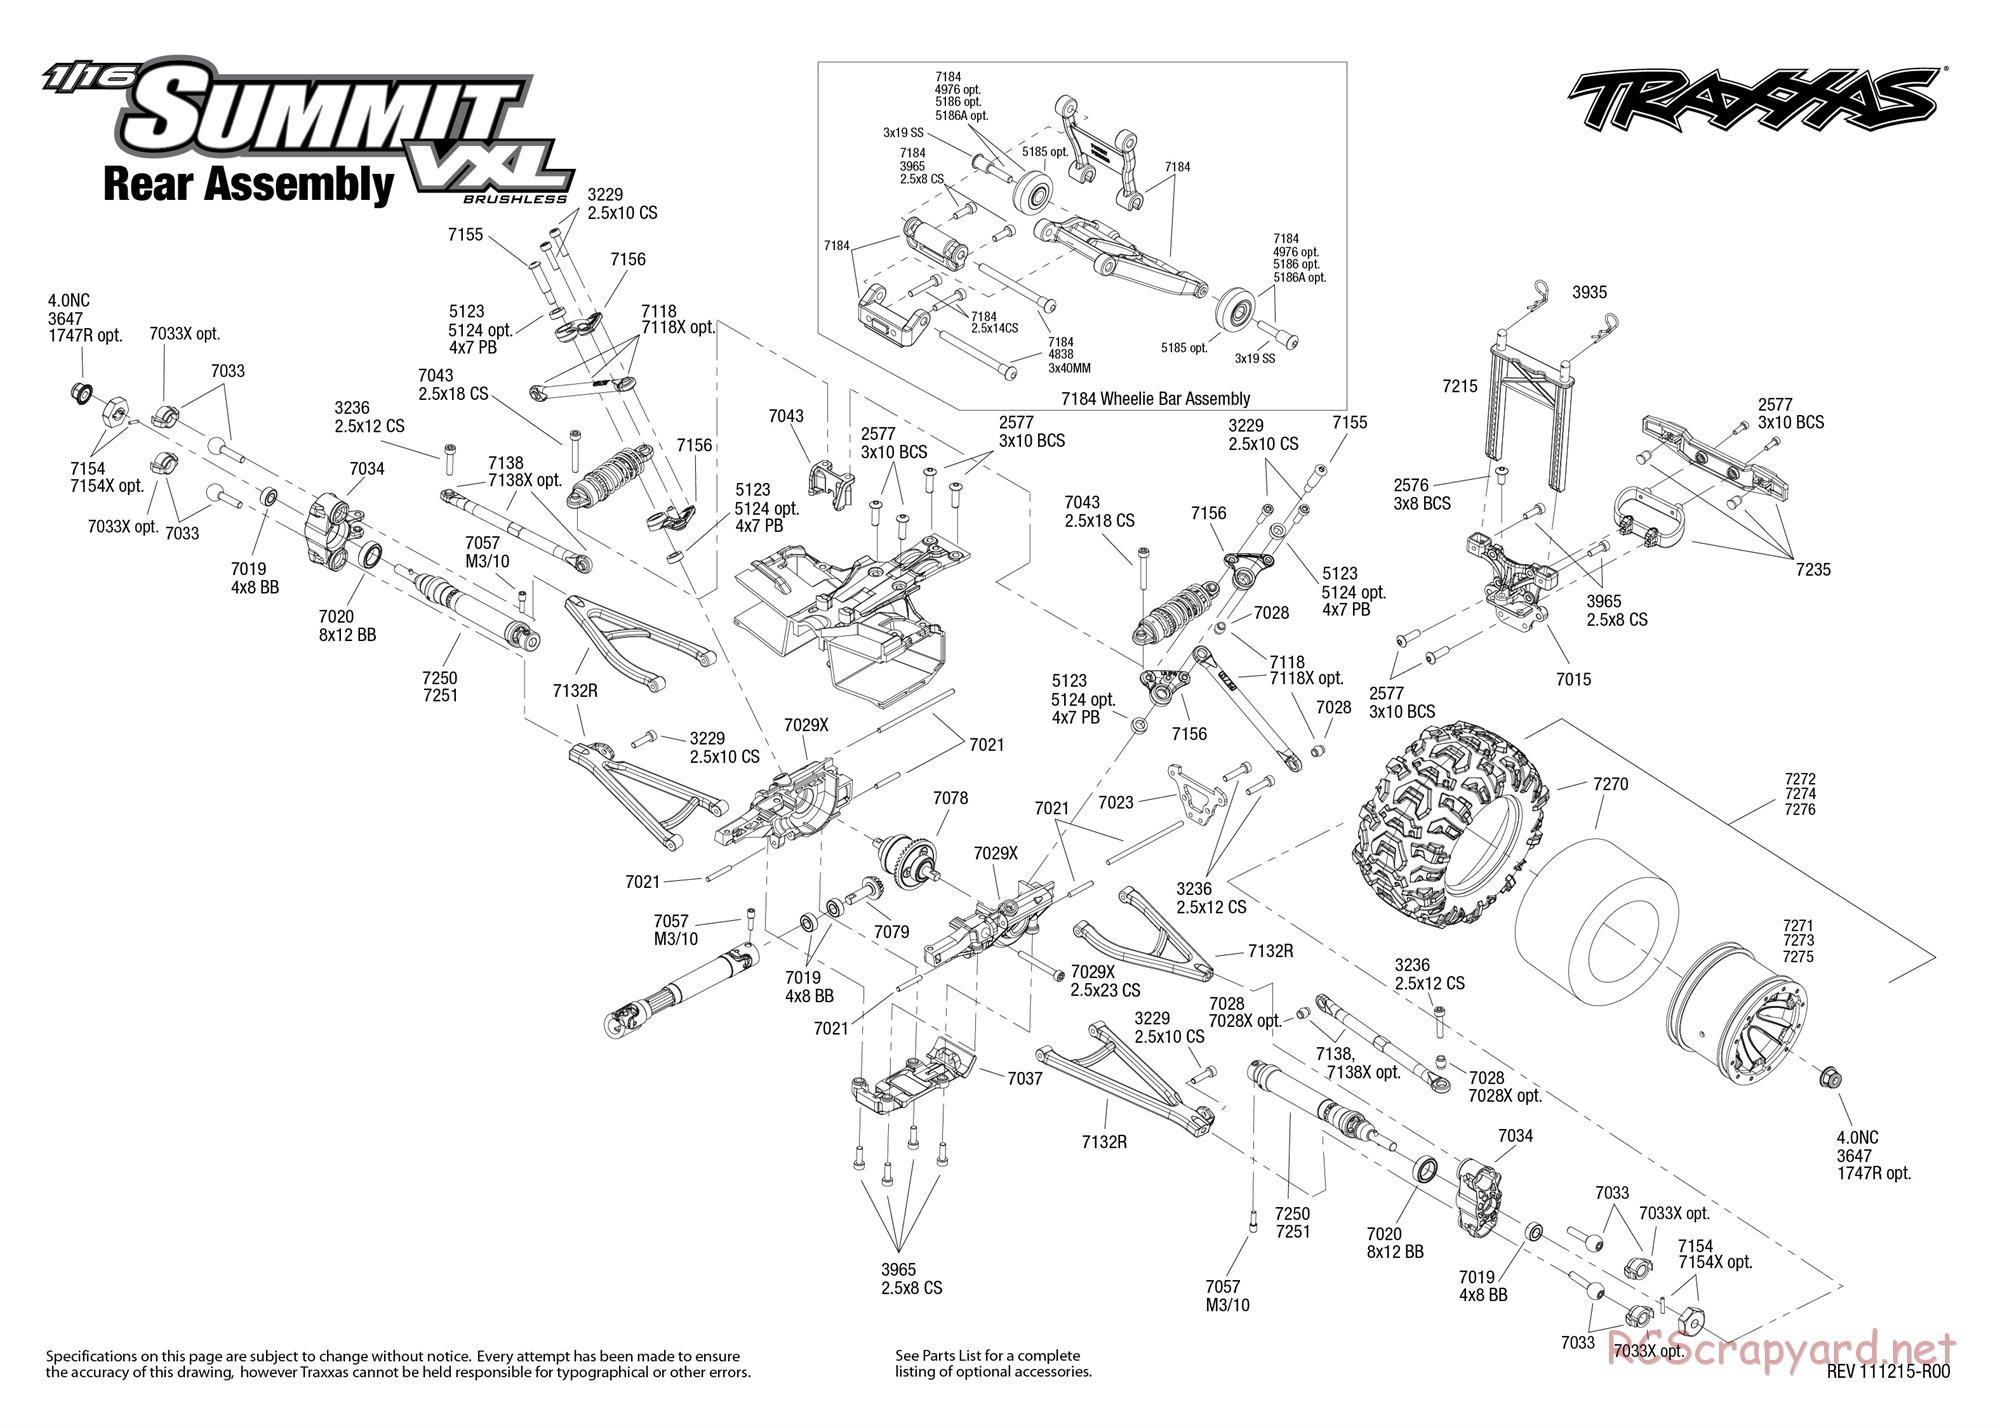 Traxxas - 1/16 Summit VXL (2010) - Exploded Views - Page 4